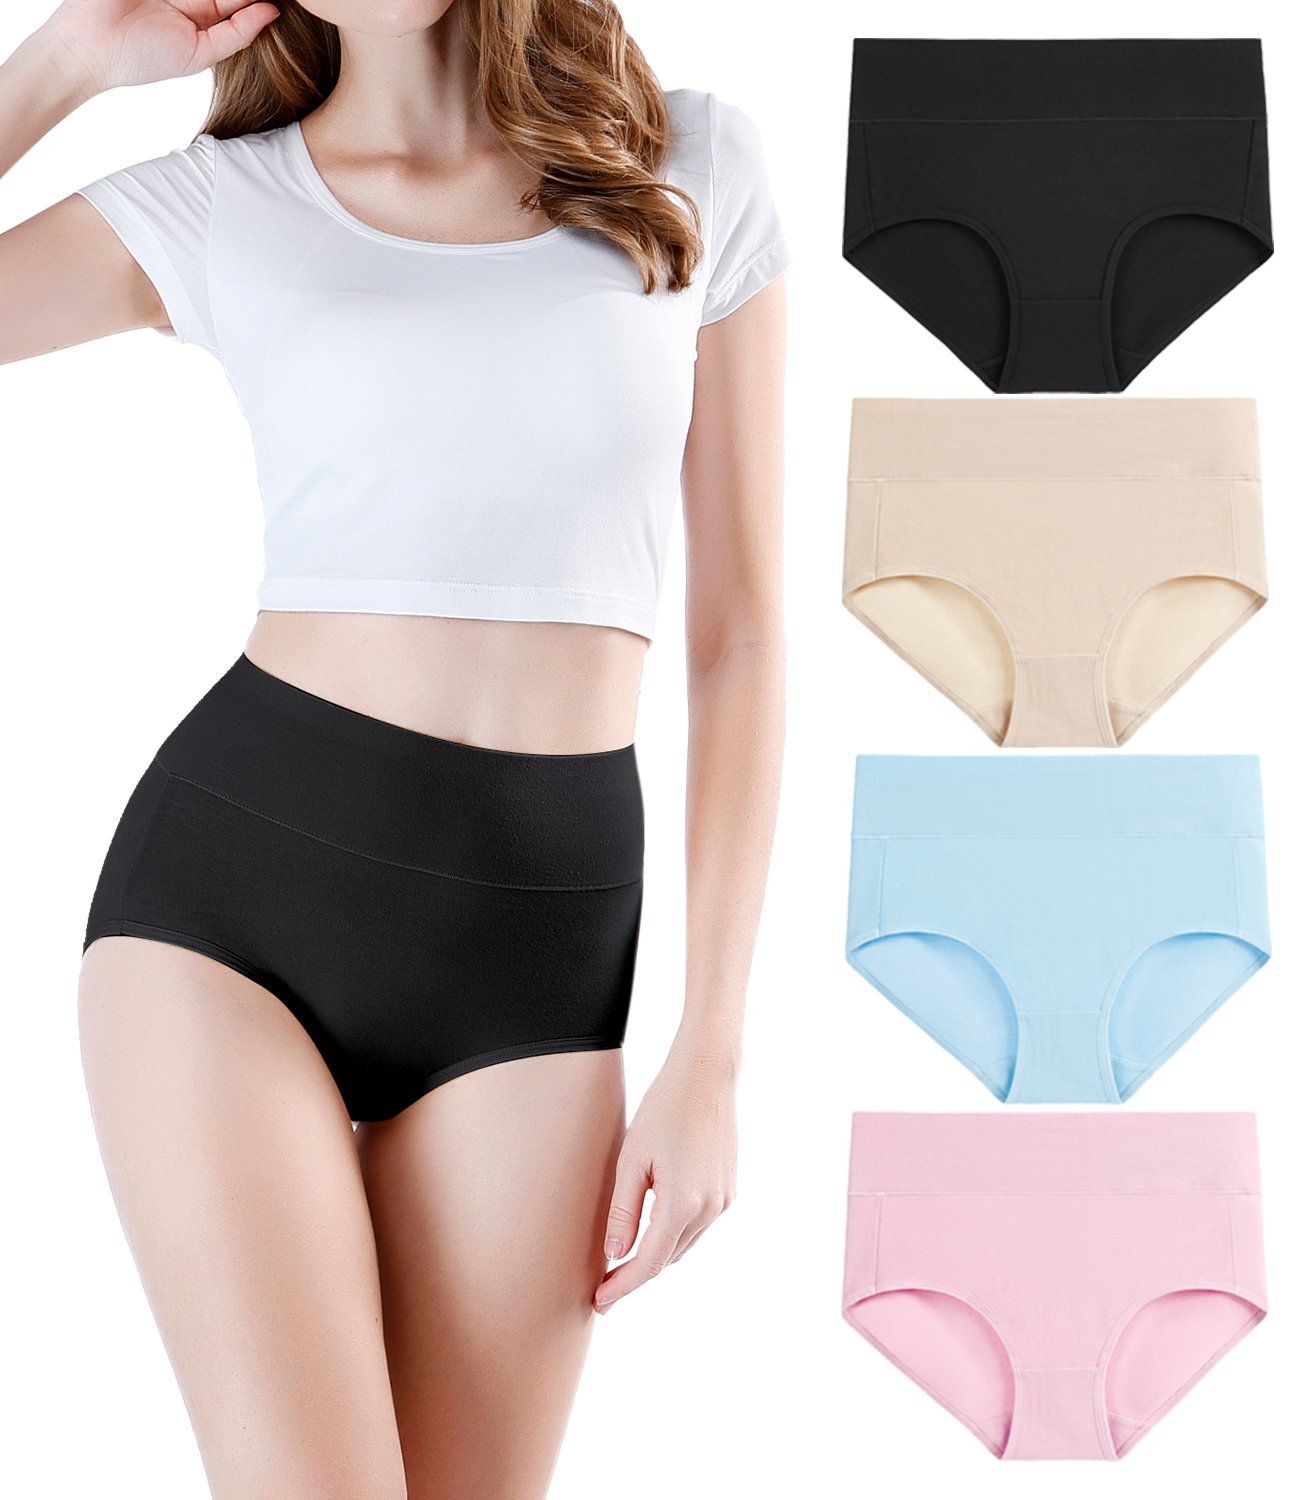 Buy Adira, Cotton Panties For Women, High Waist panty with Full Coverage, No Elastic Exposure to Skin, Pack Of 6